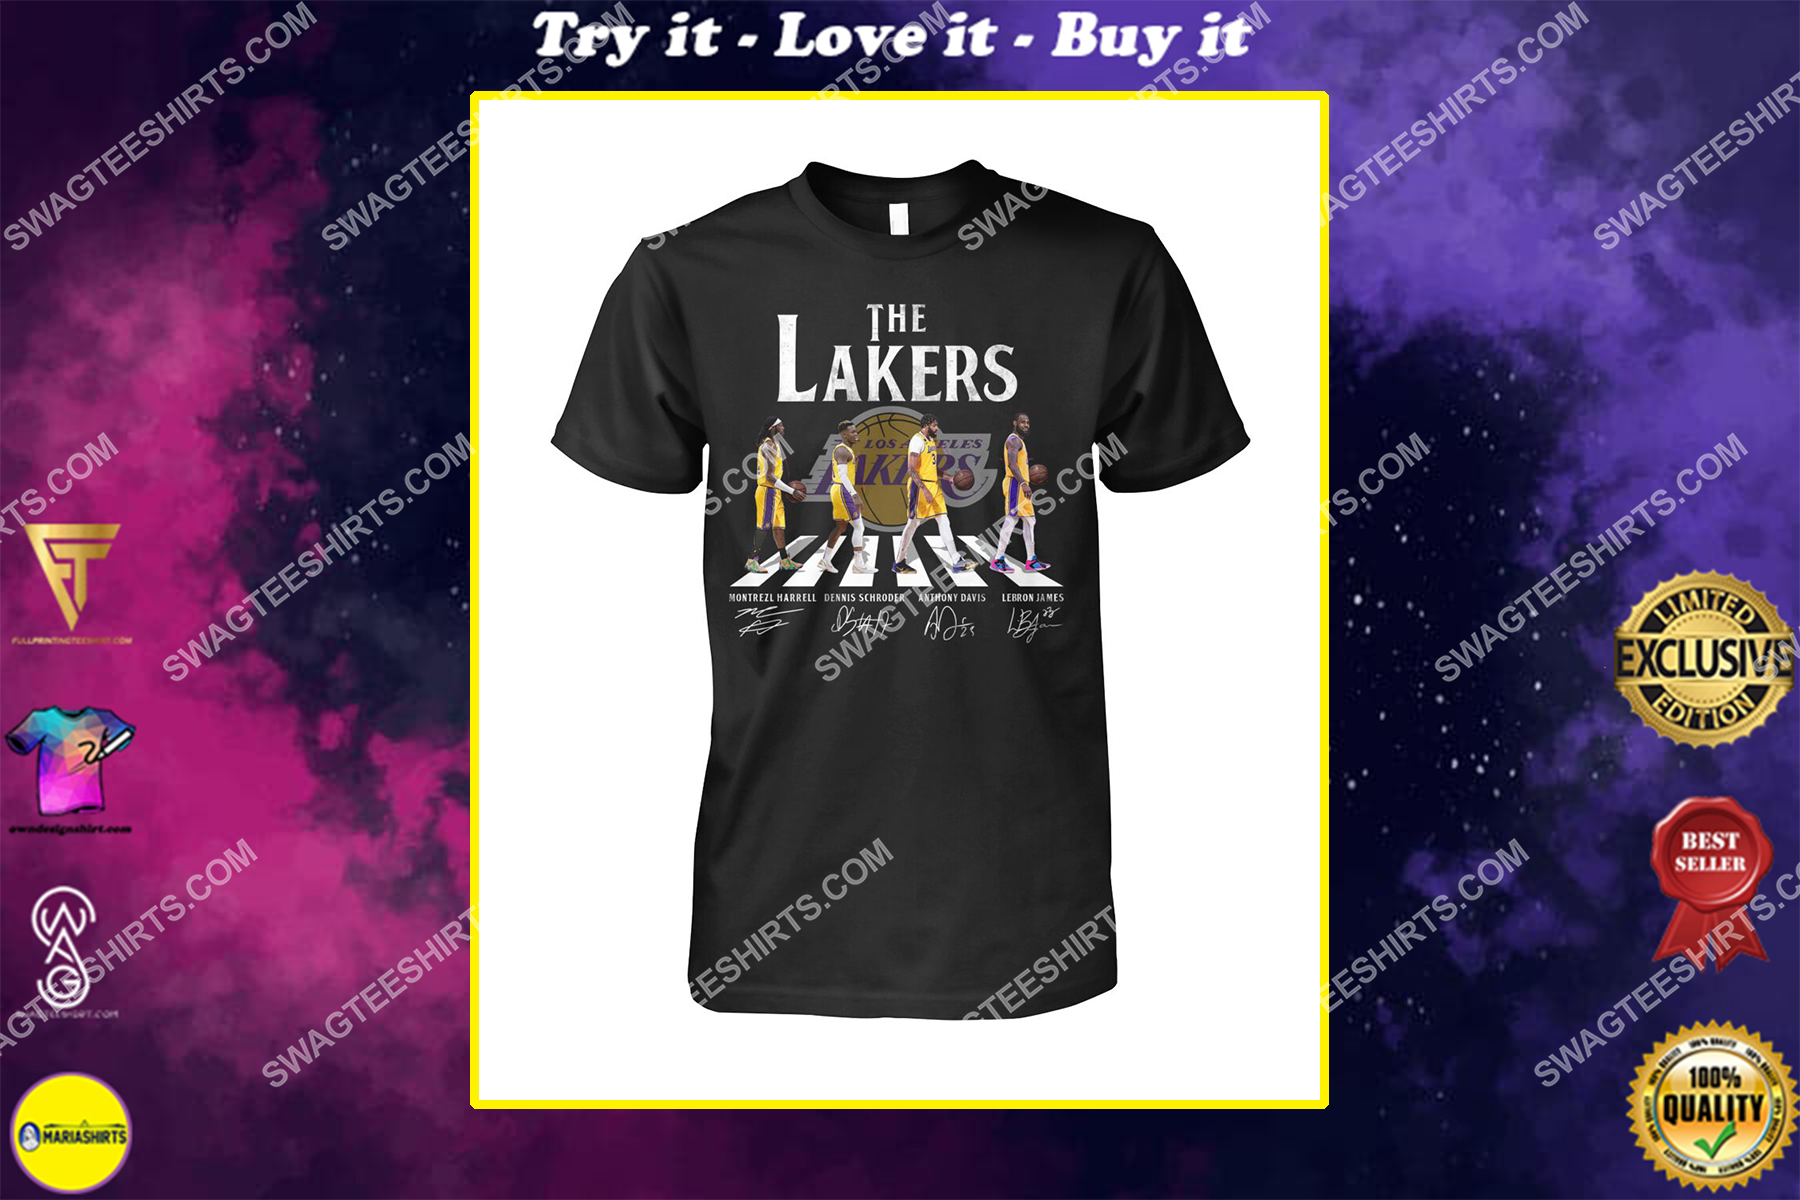 the los angeles lakers walking abbey road shirt